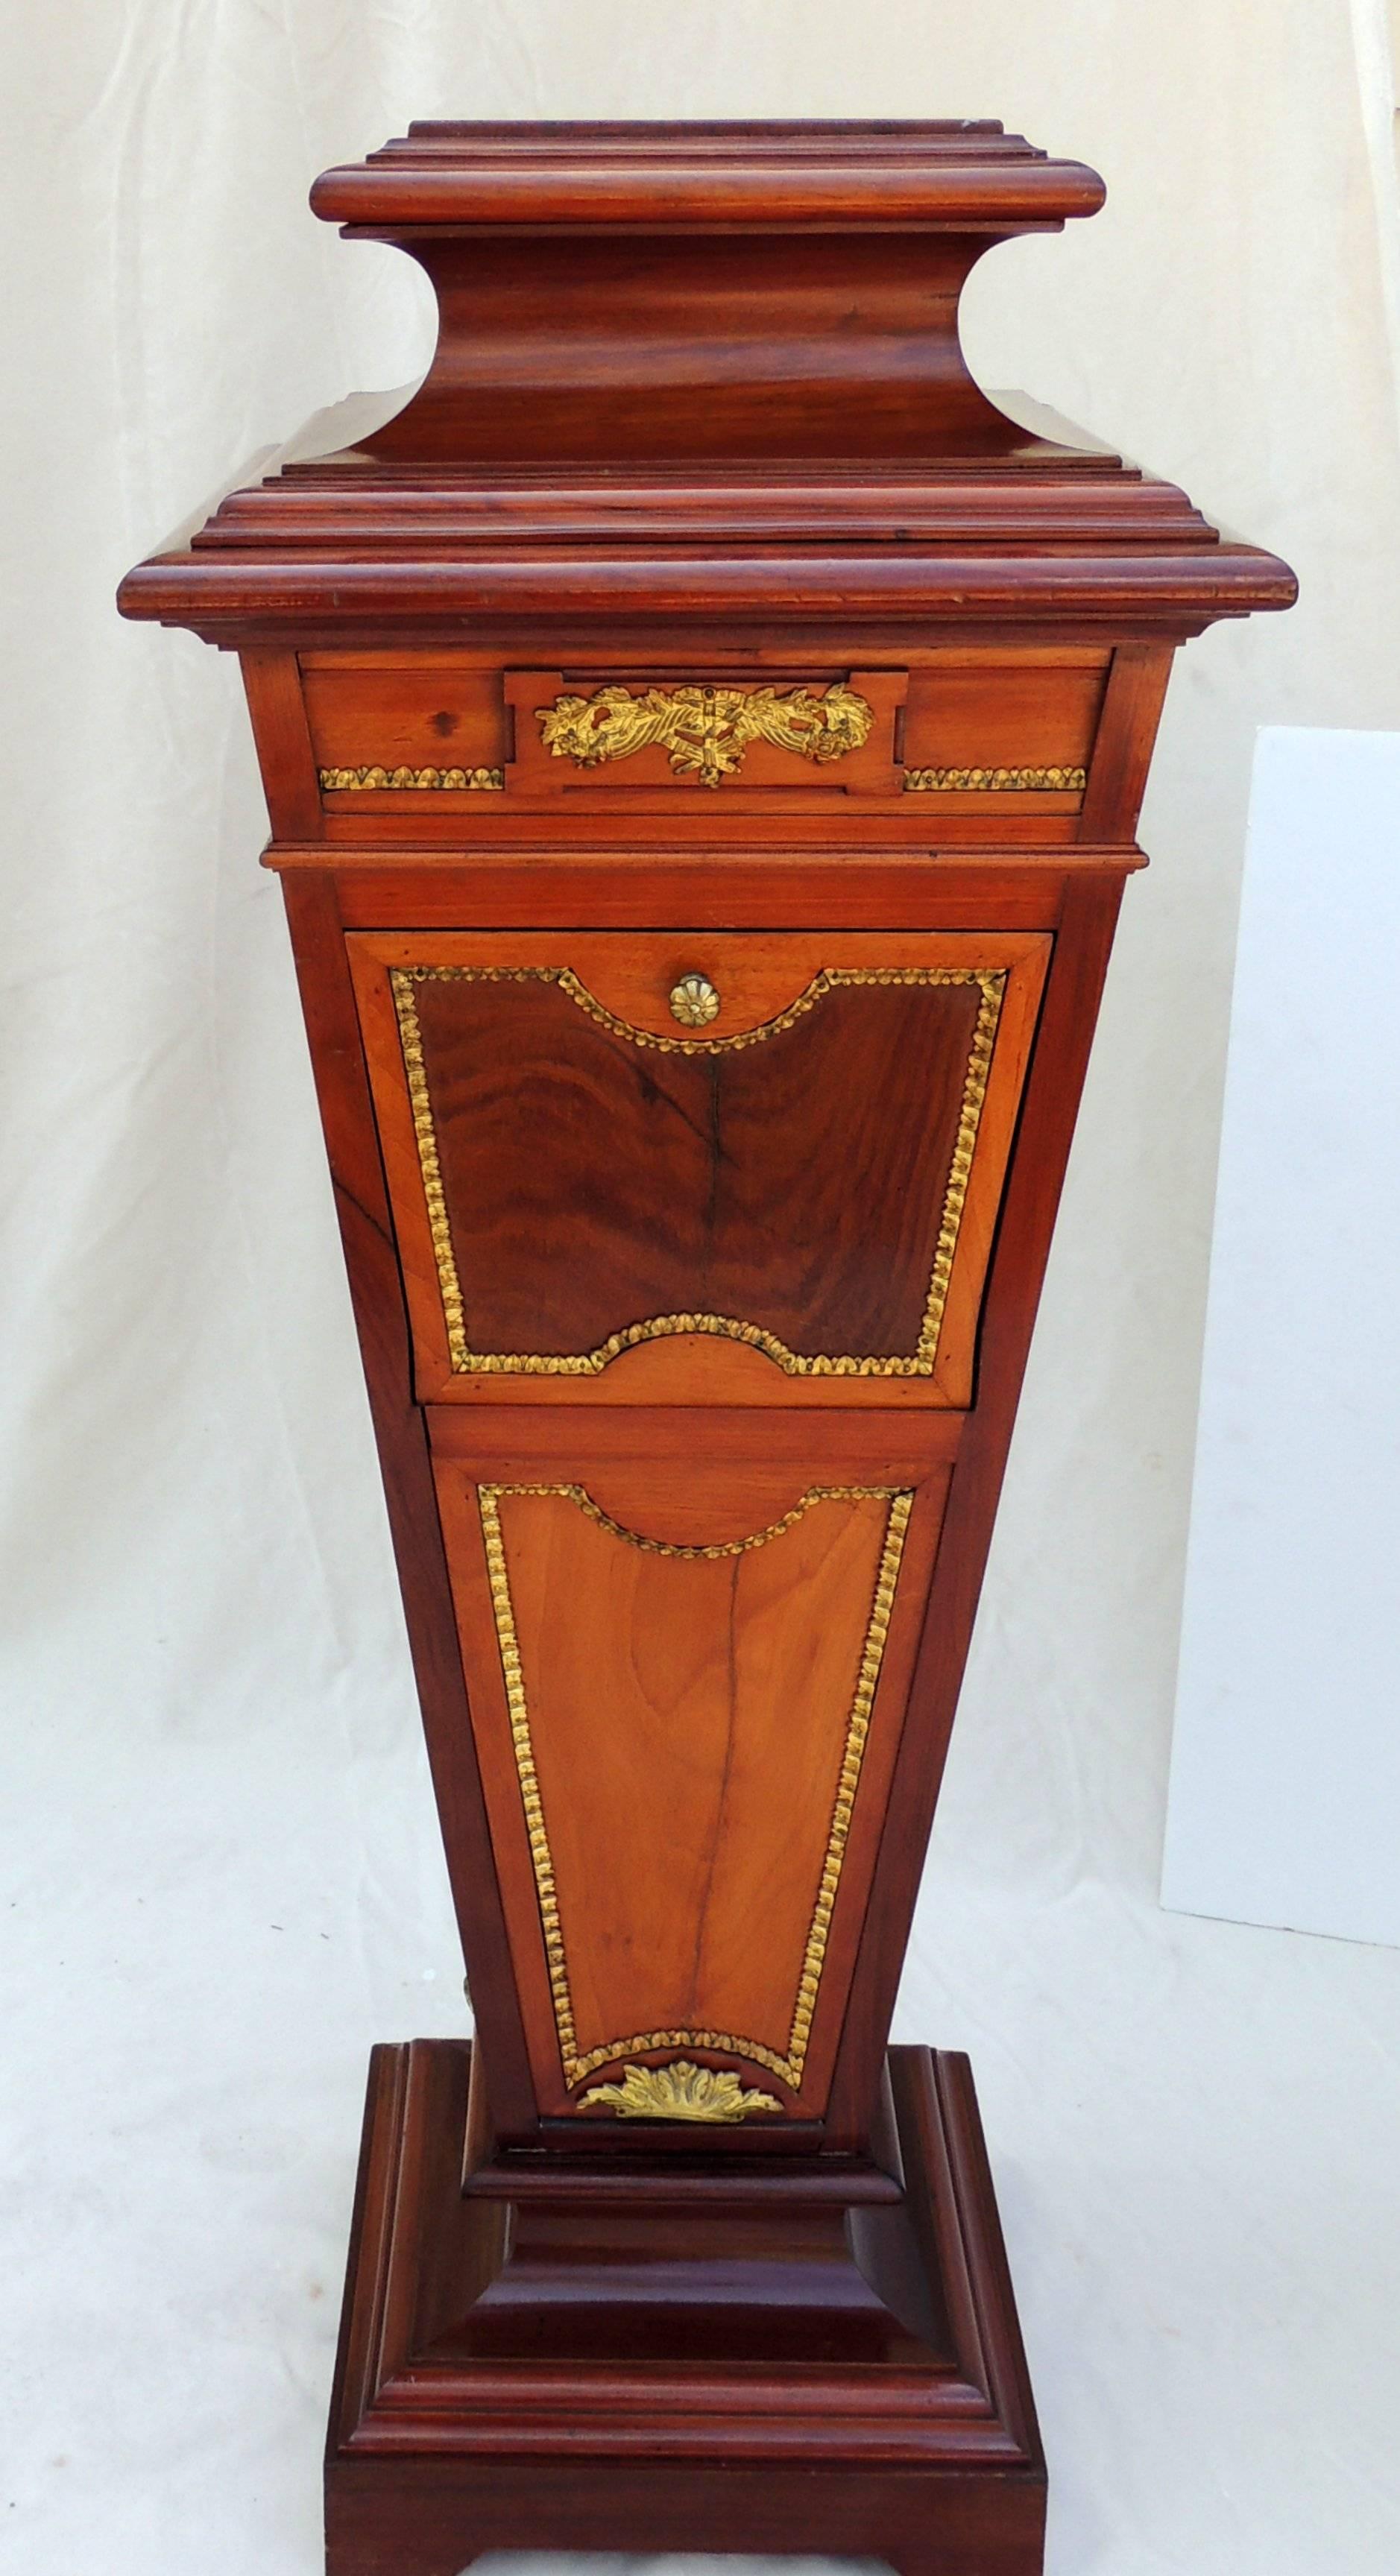 Wonderful French fine ormolu bronze-mounted mahogany pedestal with marble top and two drawers.

 Measures: 52" H x 16" W.